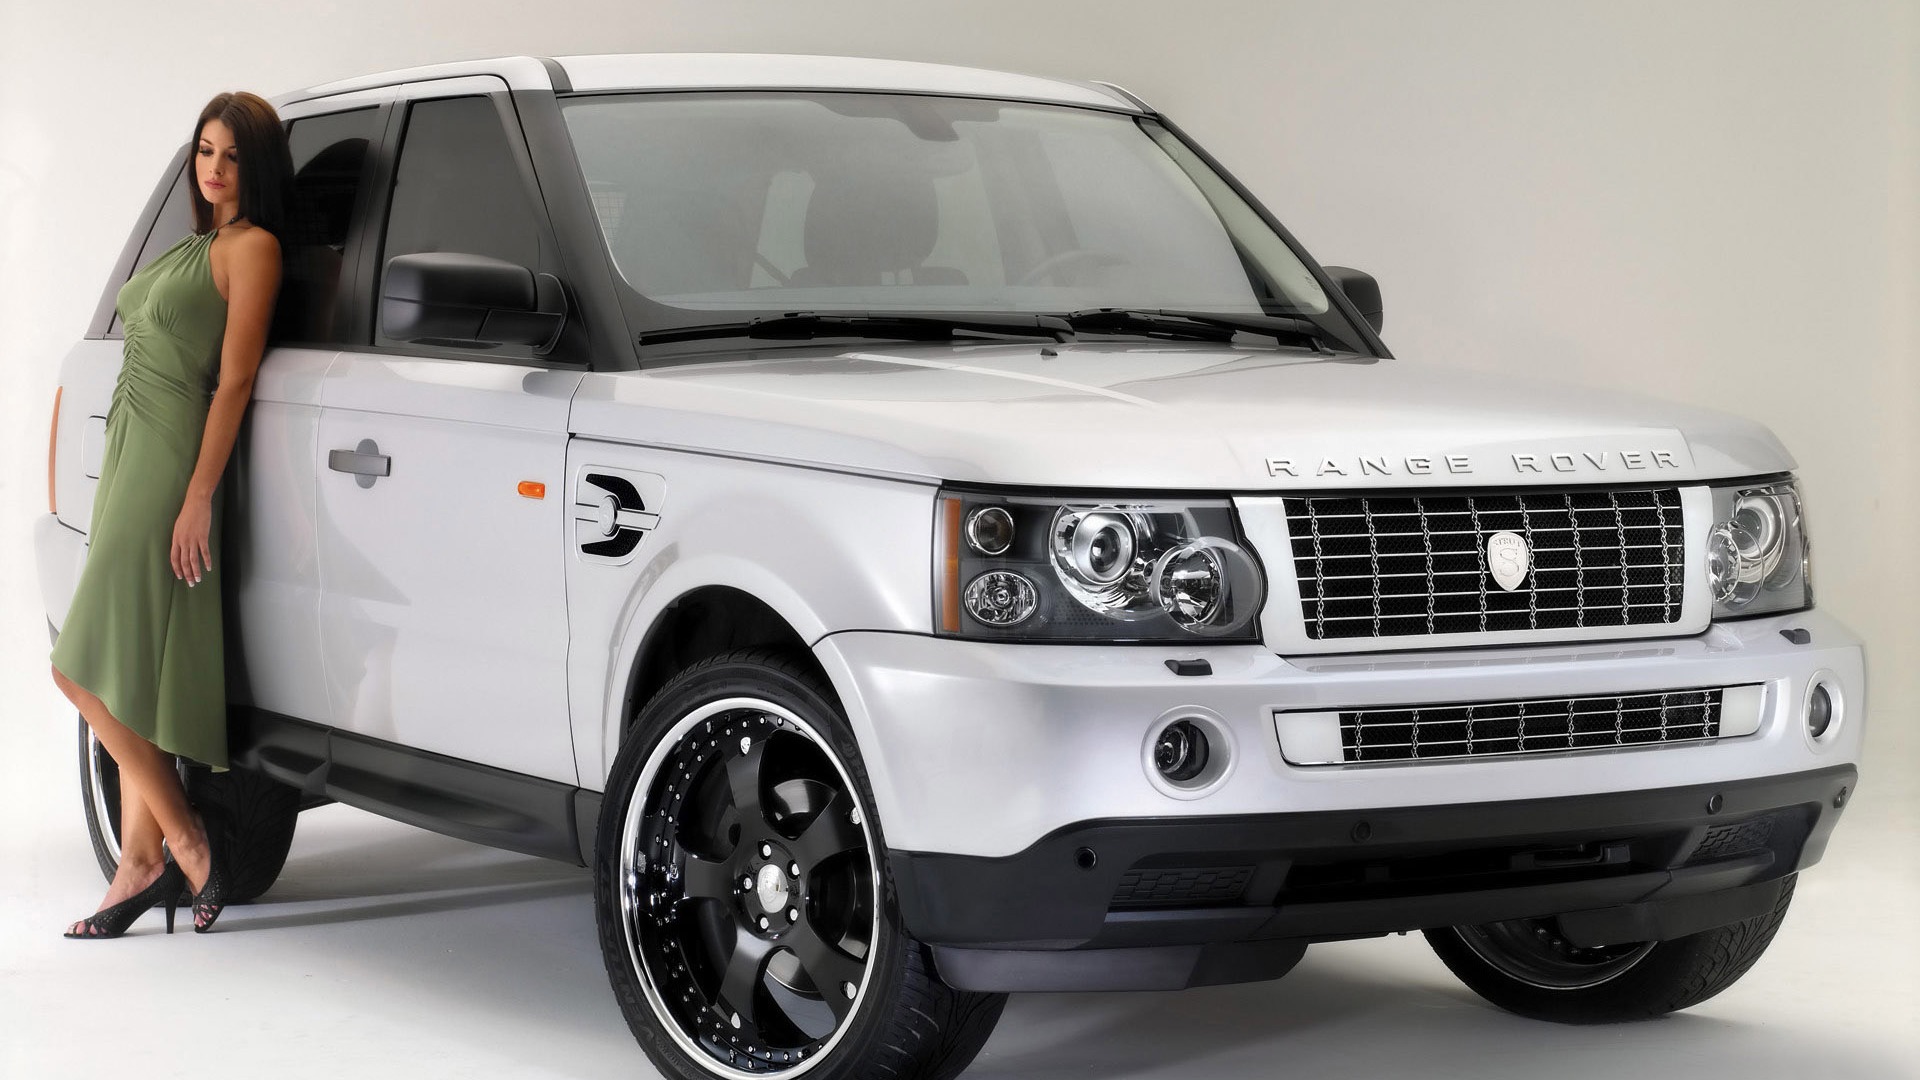 land rover, vehicles